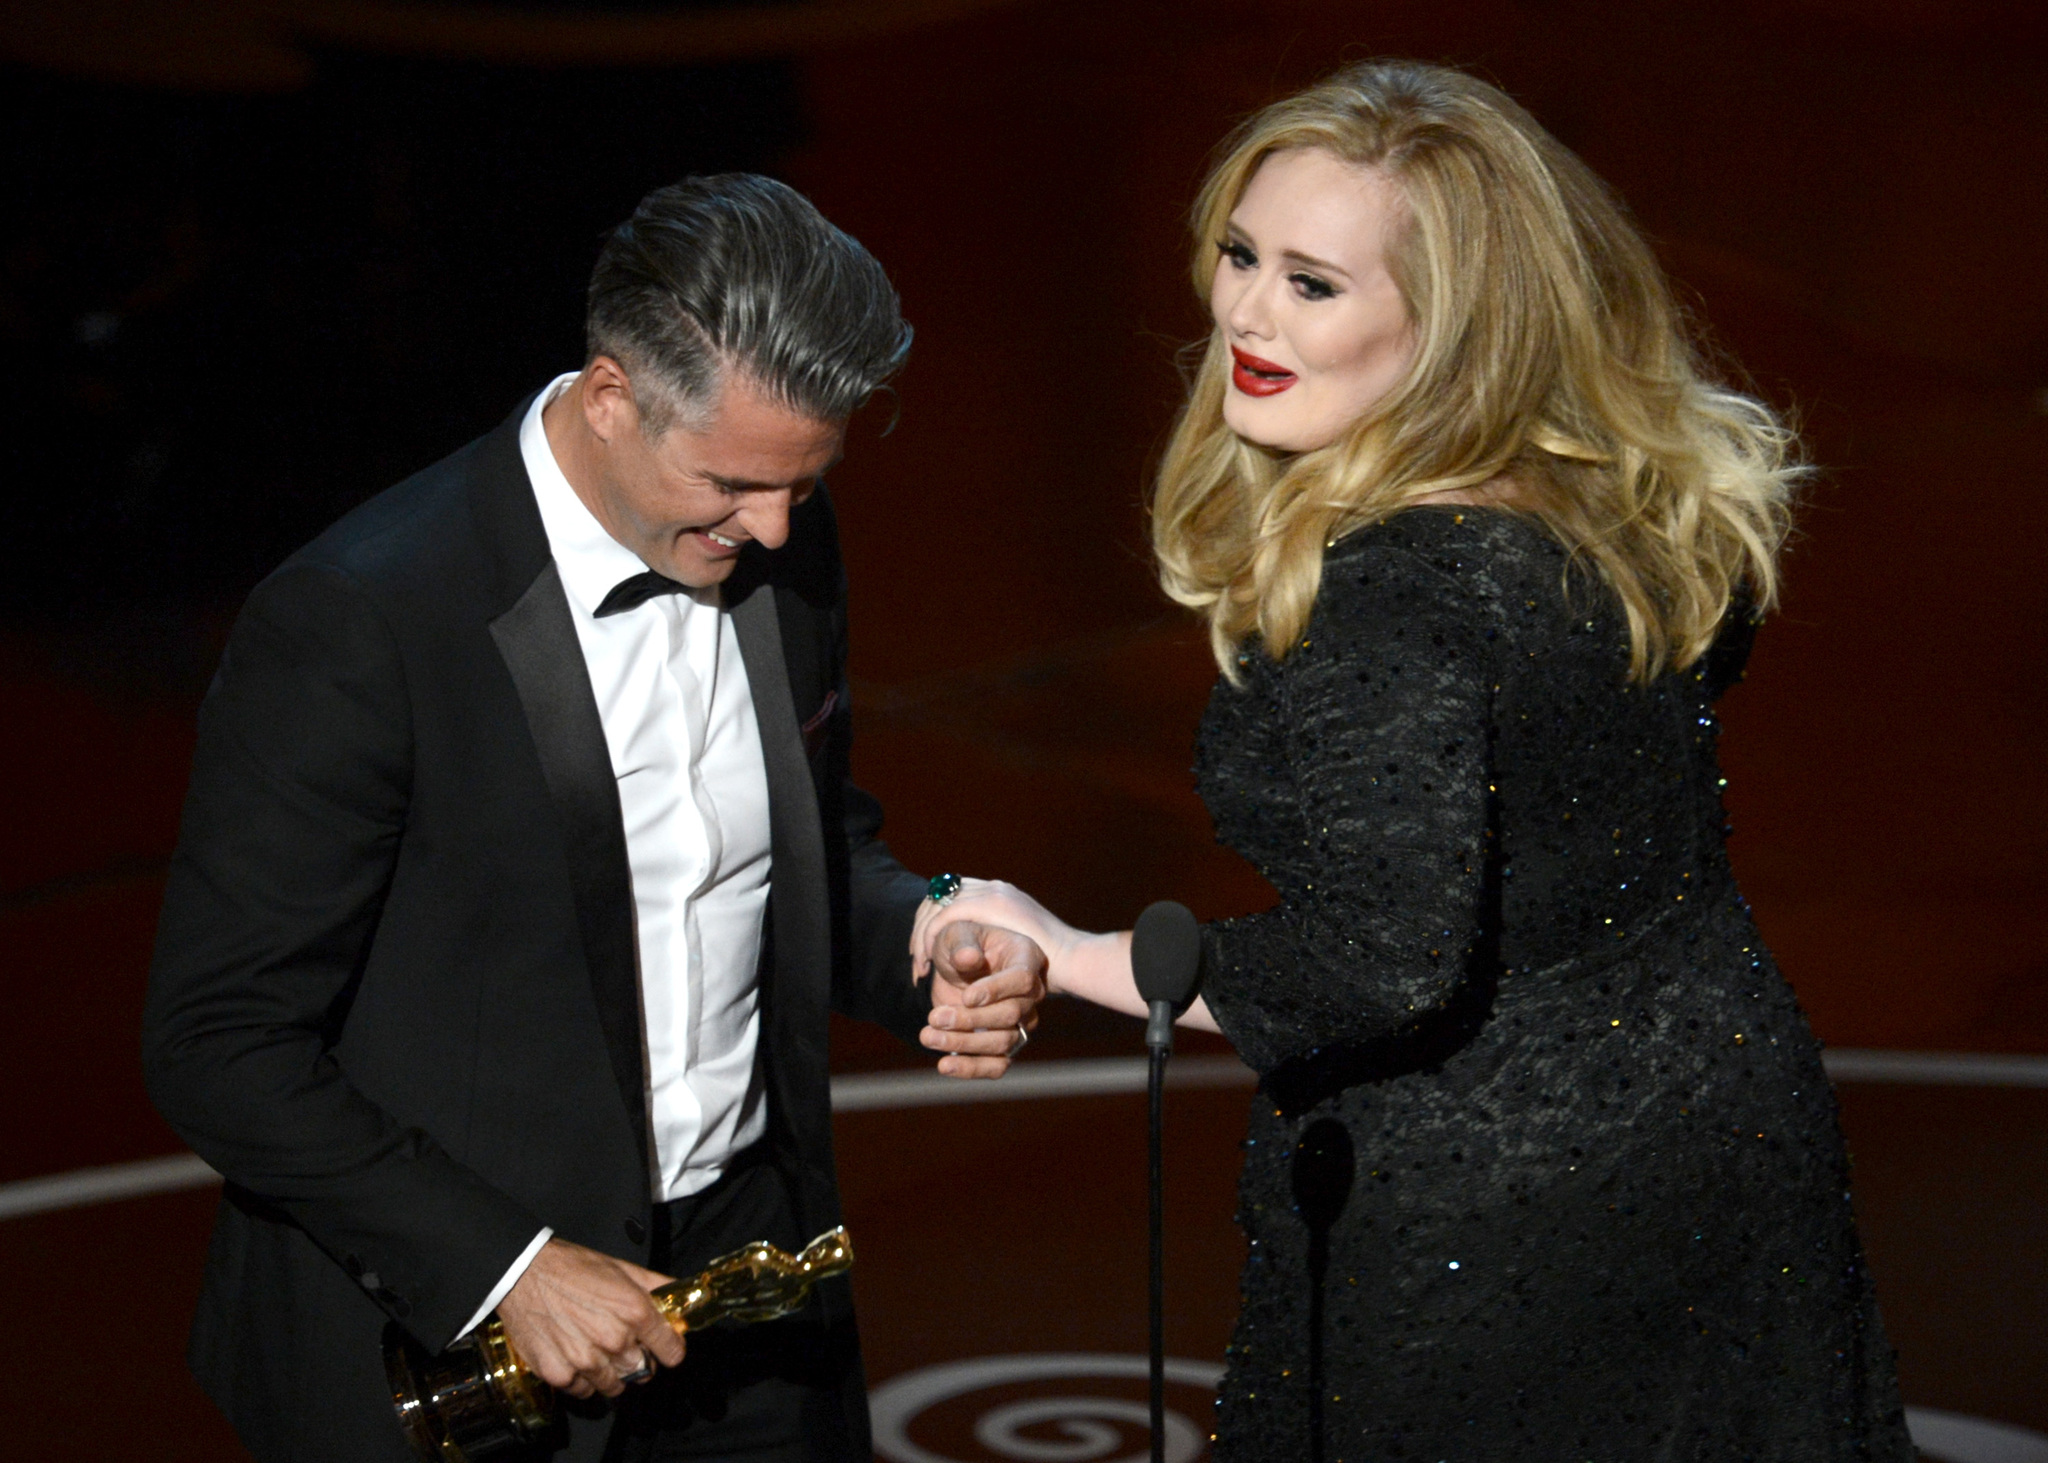 Paul Epworth and Adele at event of The Oscars (2013)